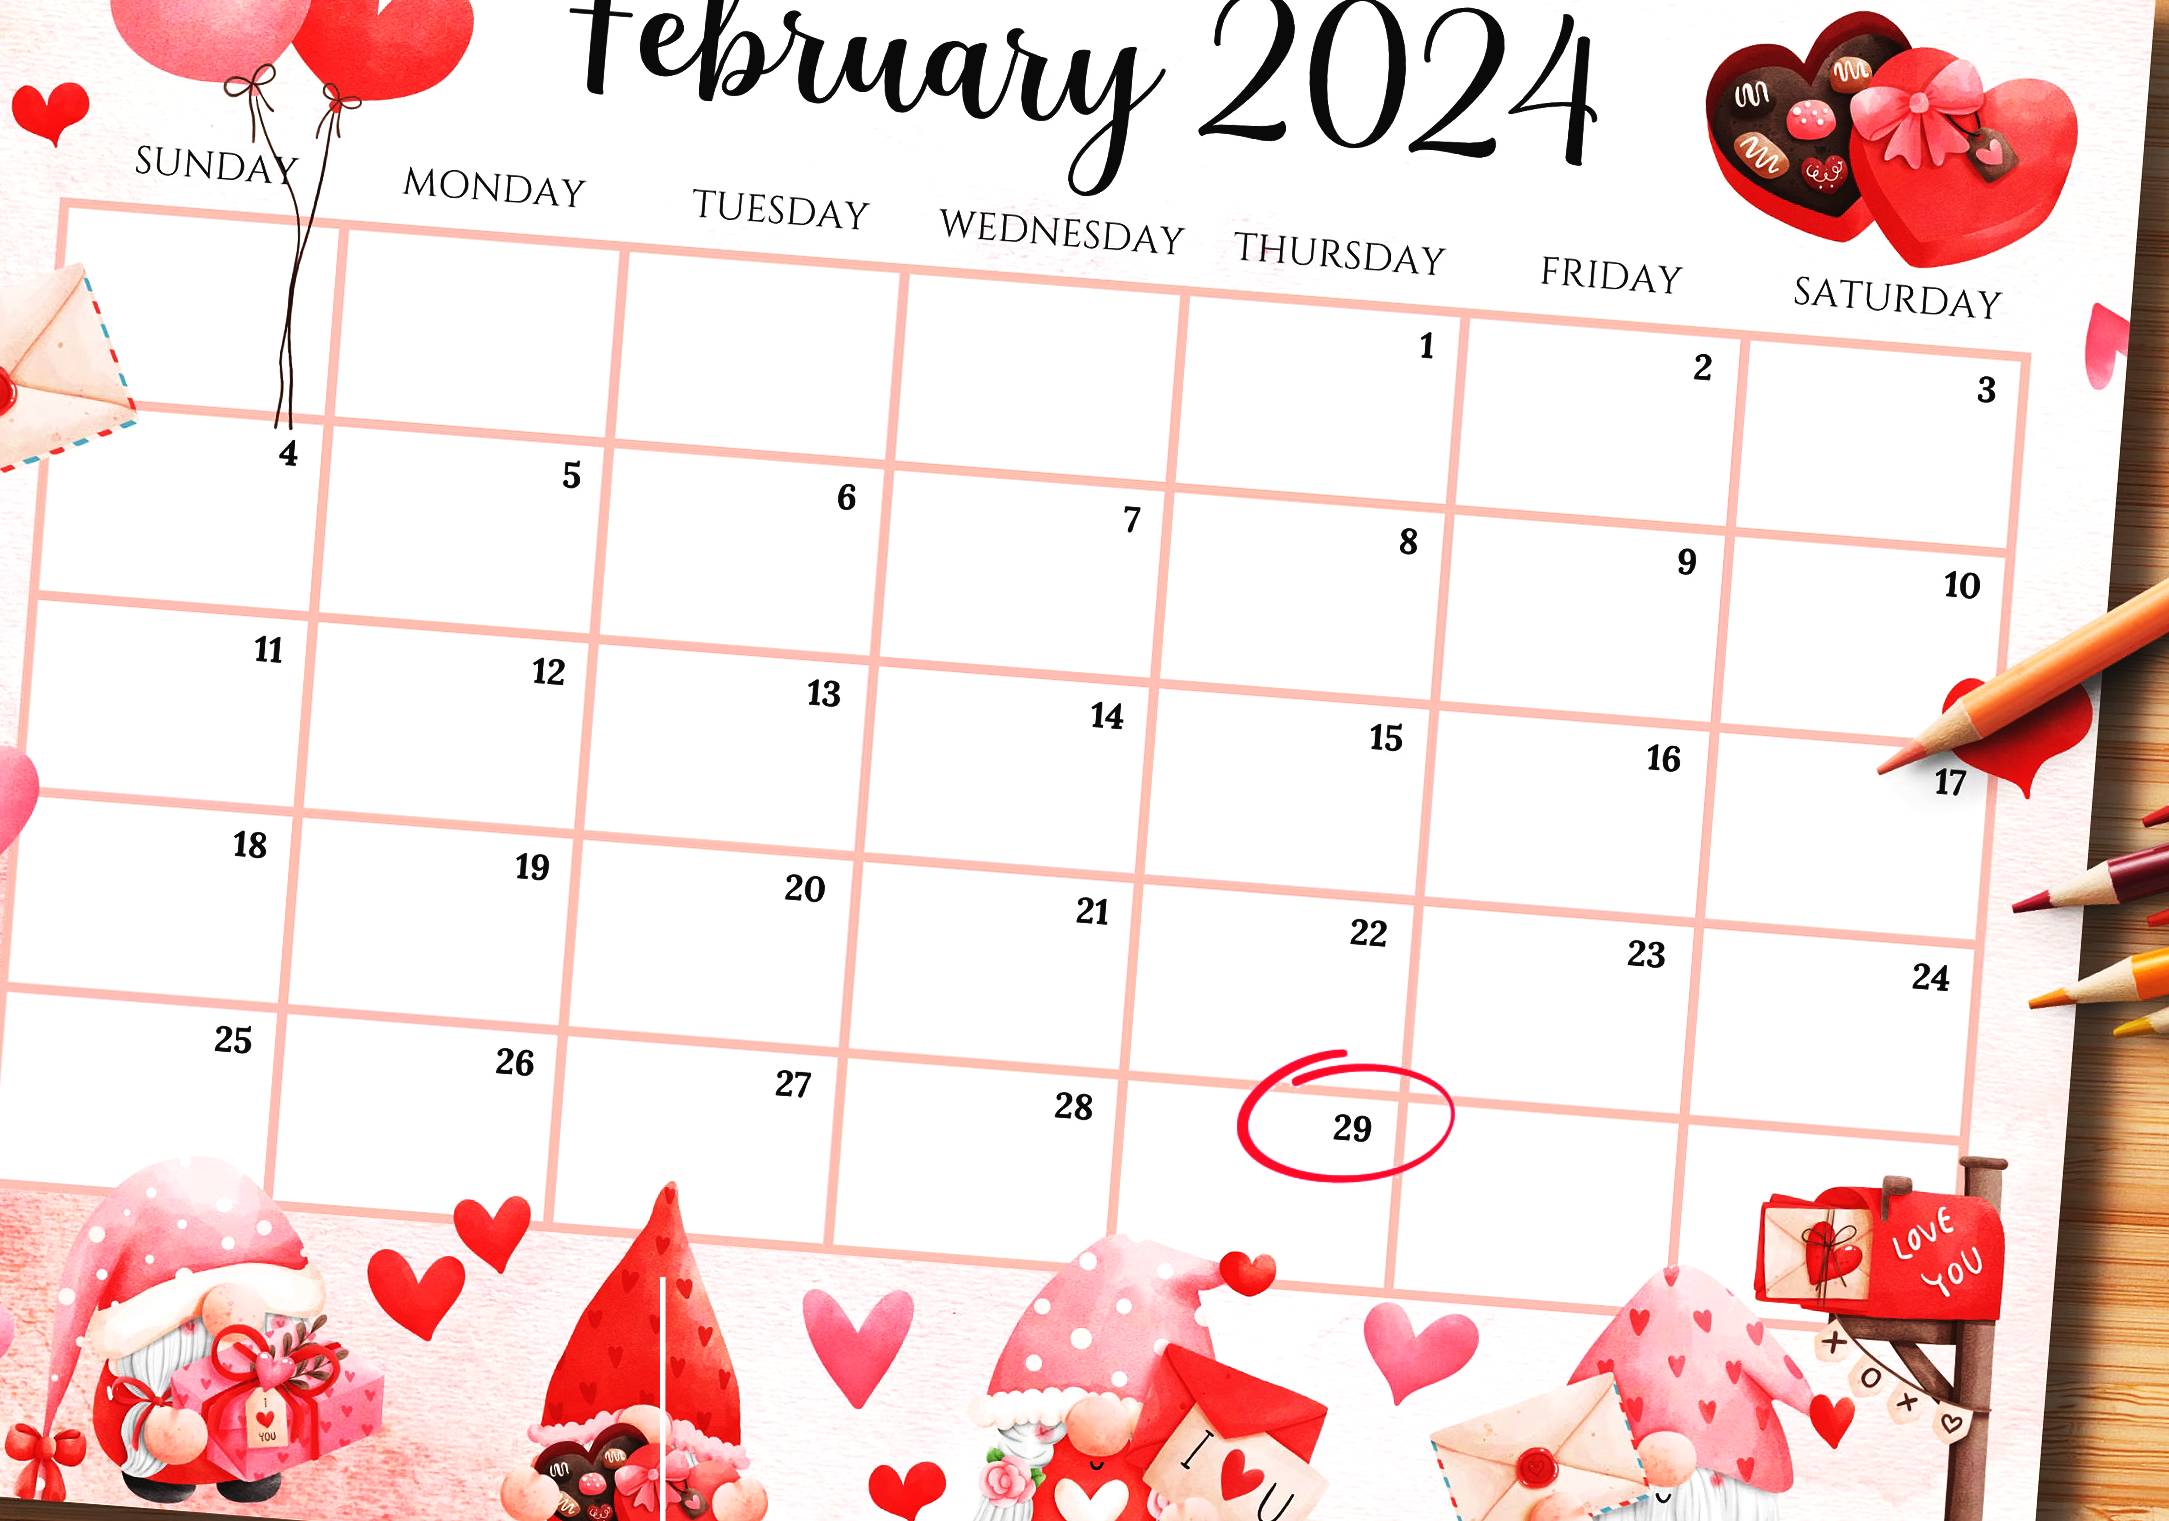 From this point on in 2024, dates leap ahead two calendar days.